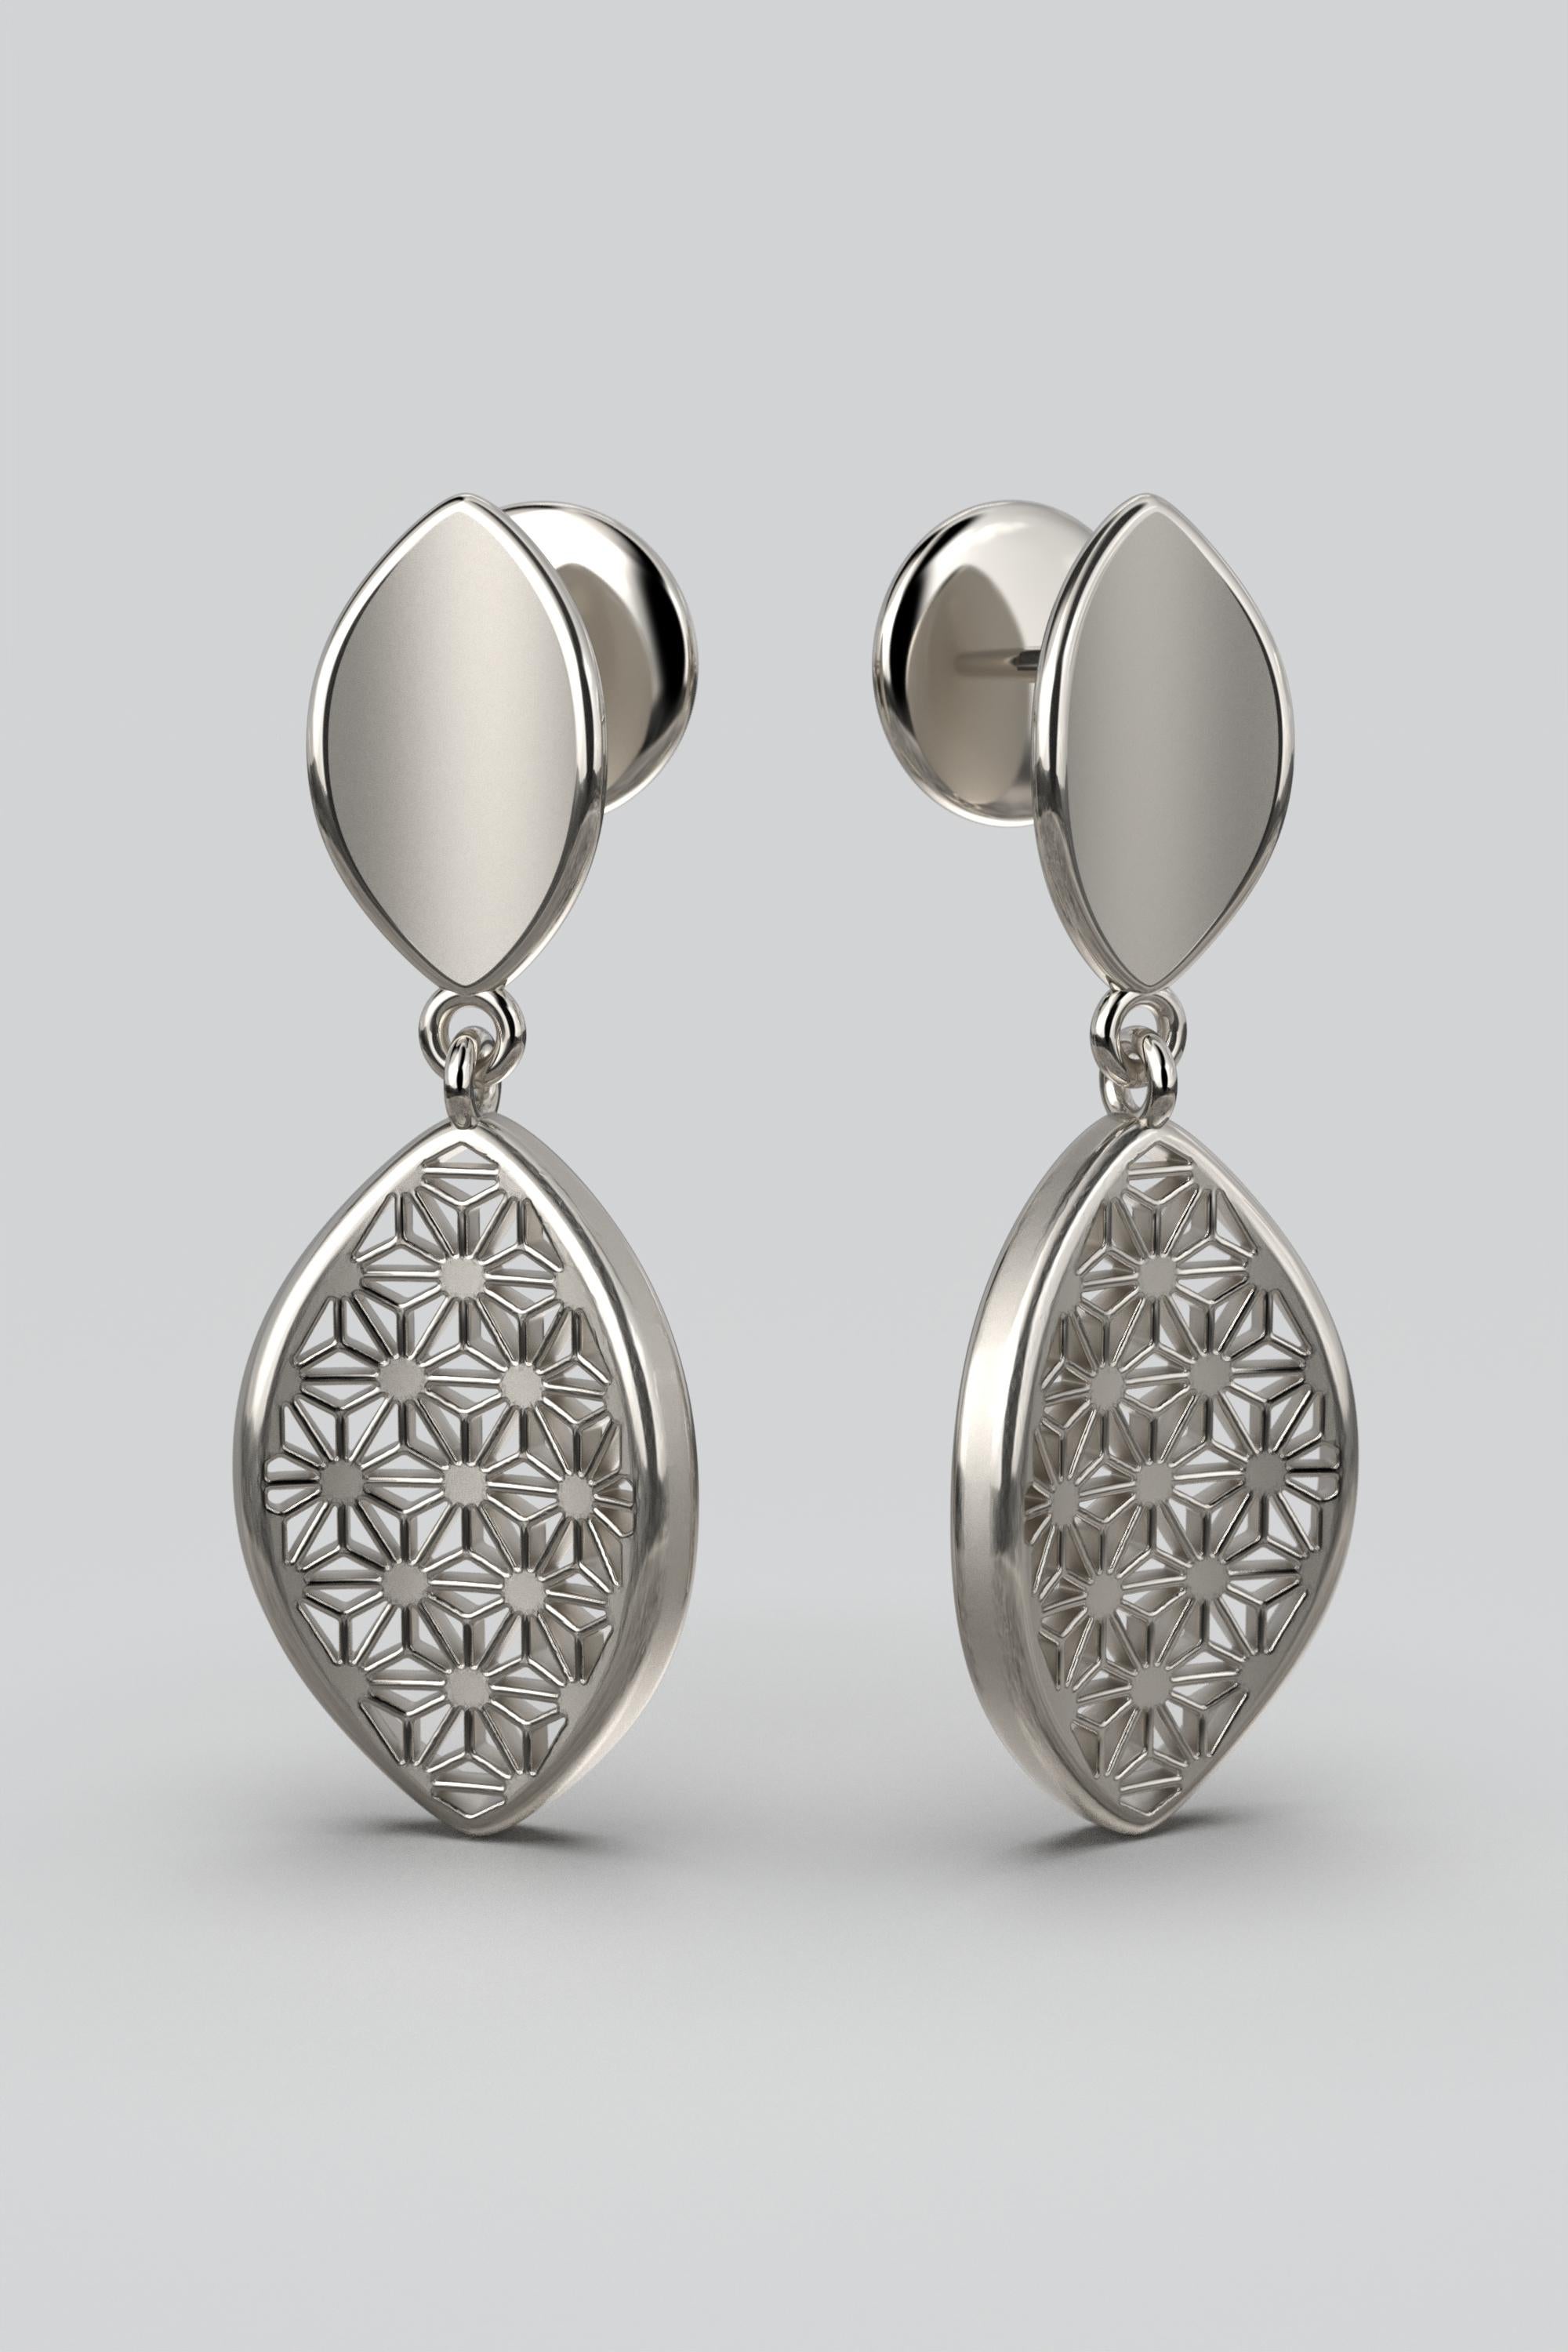 Sashiko Pattern Earrings Made in Italy in 18k Gold By Oltremare Gioielli For Sale 2